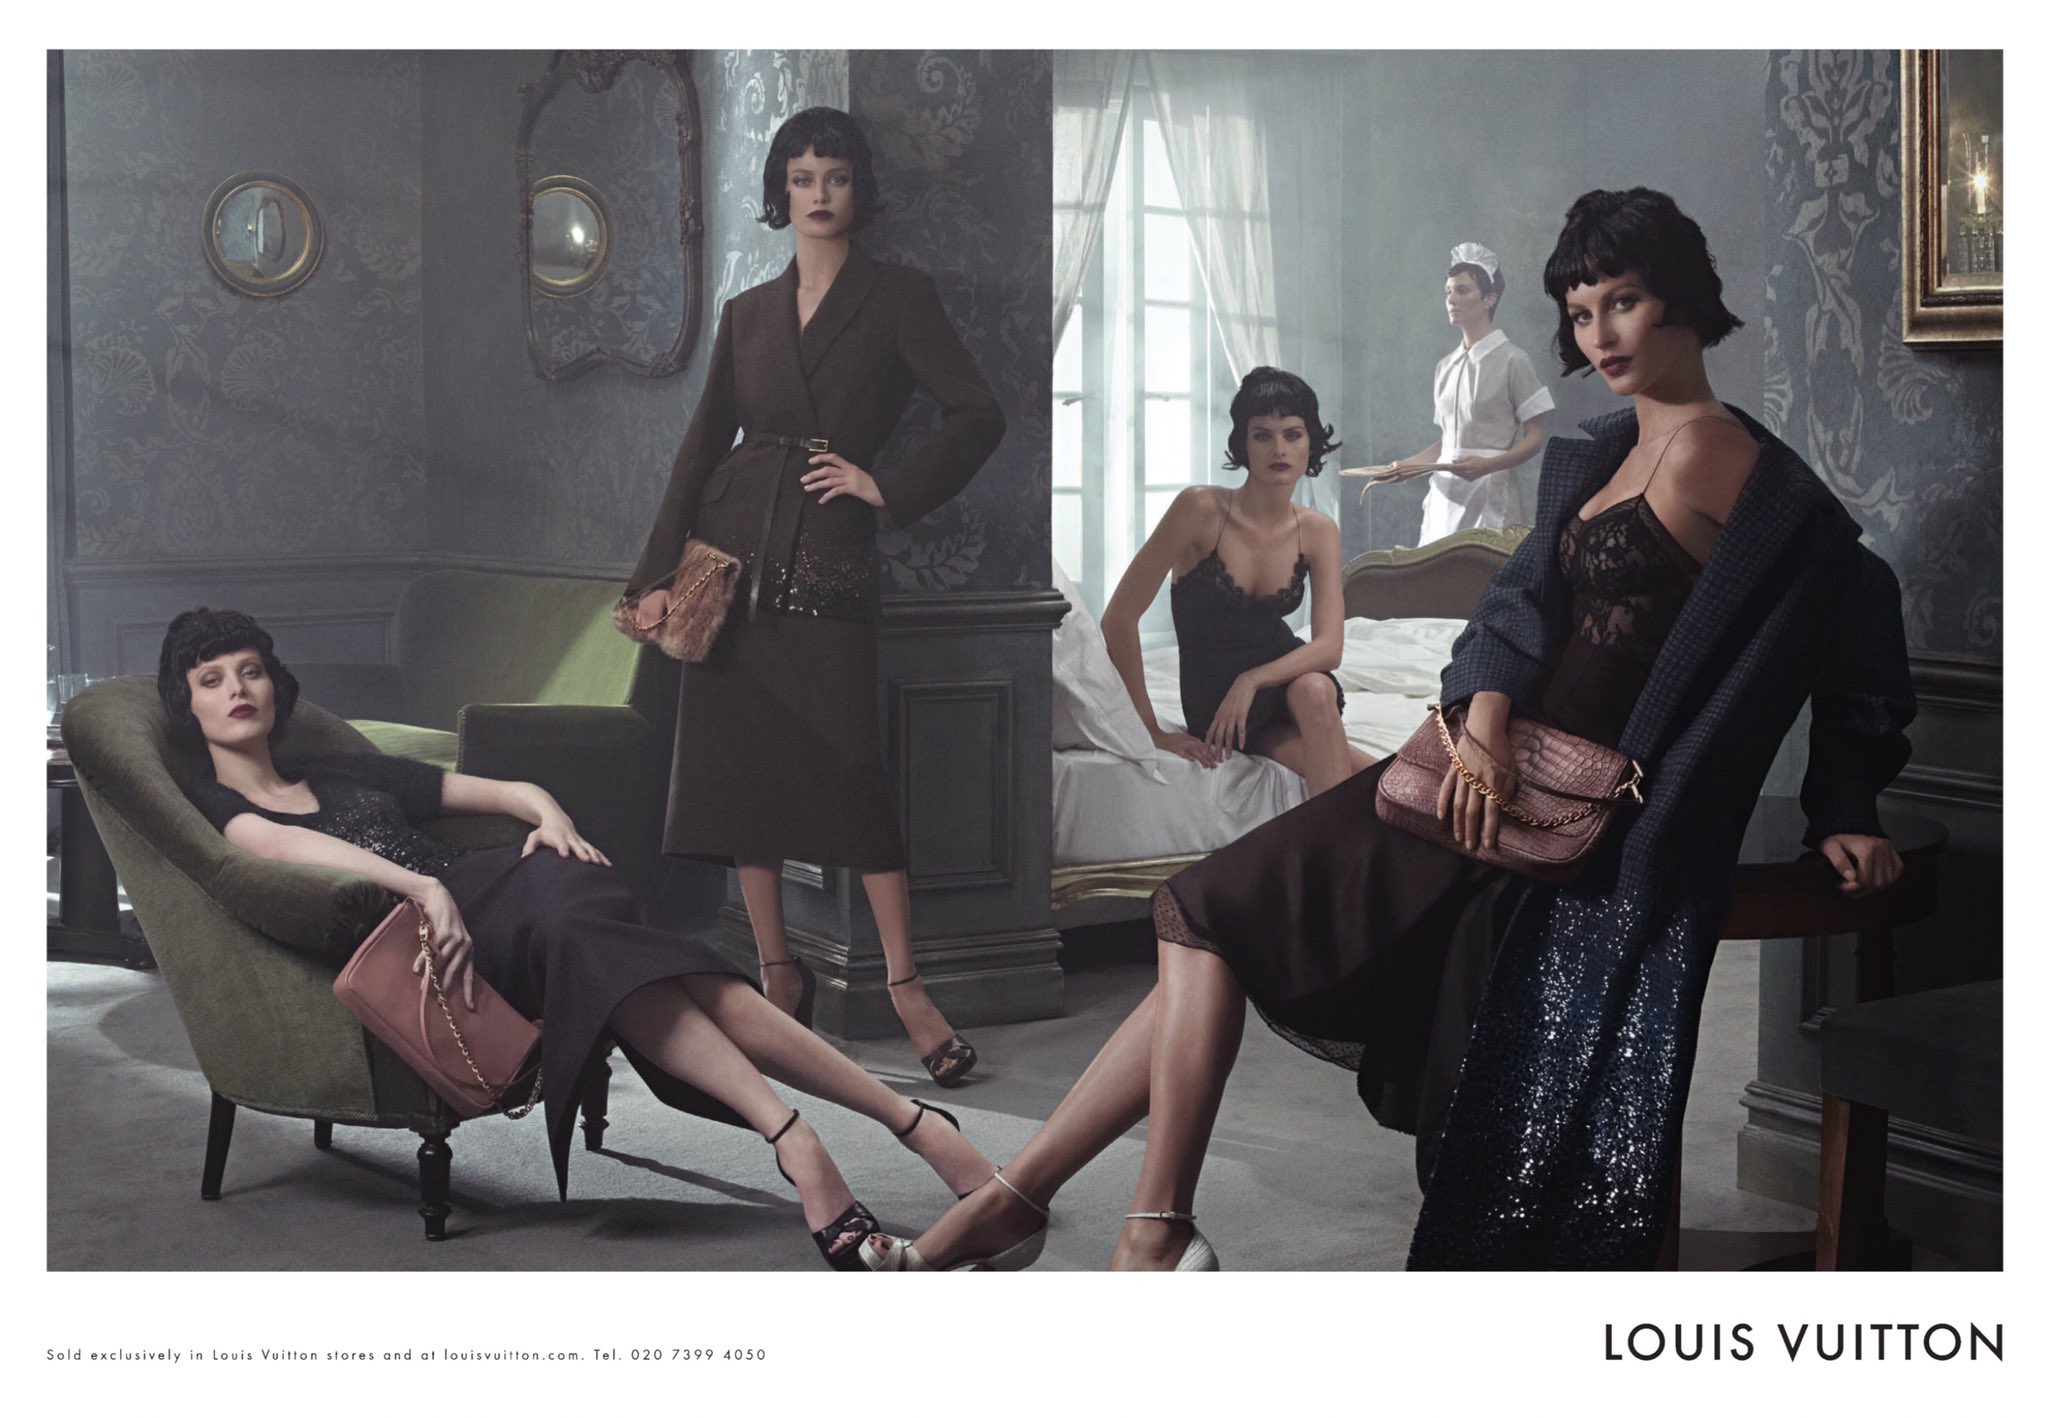 ً auf "gisele bündchen, karen elson, carolyn murphy and isabeli fontana for louis vuitton by marc jacobs f/w 2013 campaign, photographed by steven meisel https://t.co/gDxtyQpvBF" Twitter